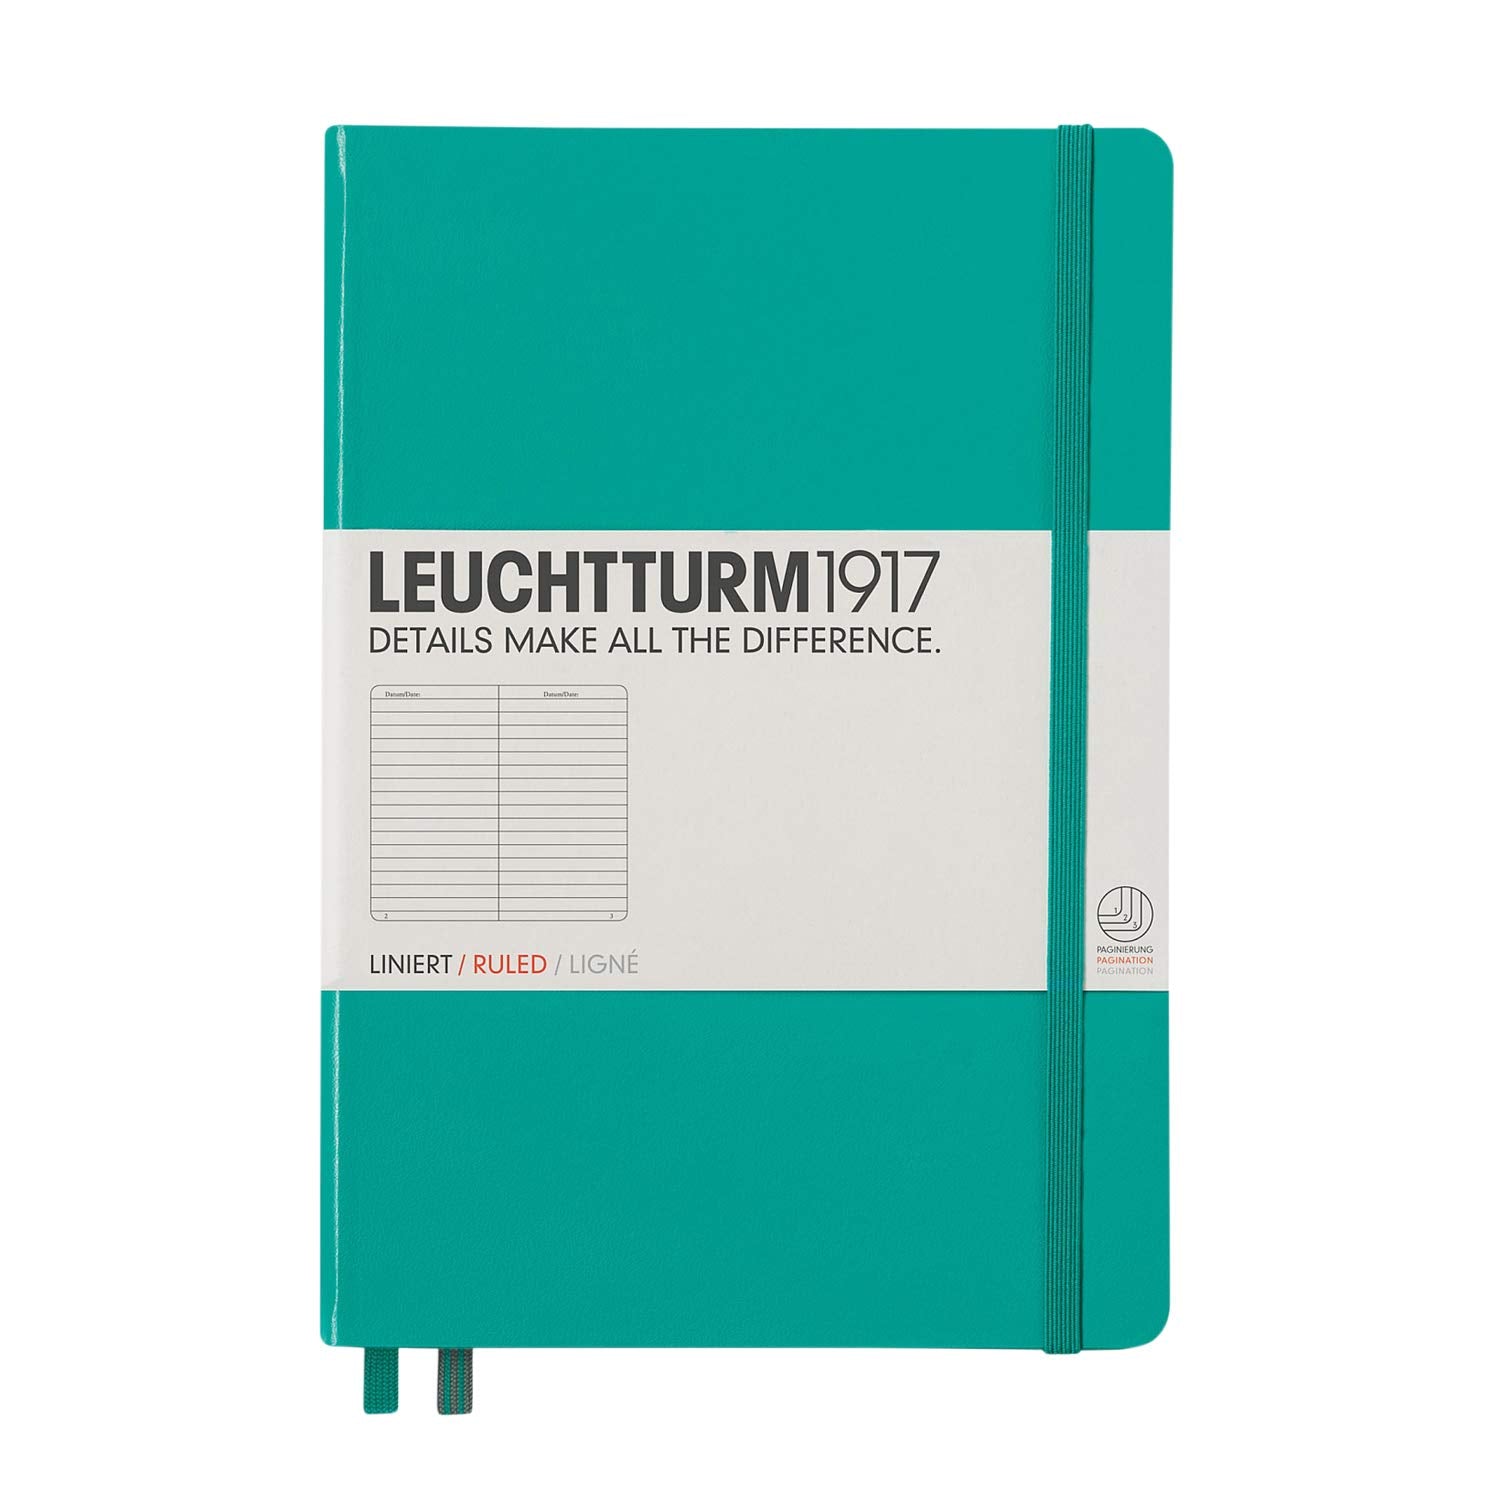 Leuchtturm1917 Medium A5 Ruled Hardcover Notebook (Emerald) - 249 Numbered Pages